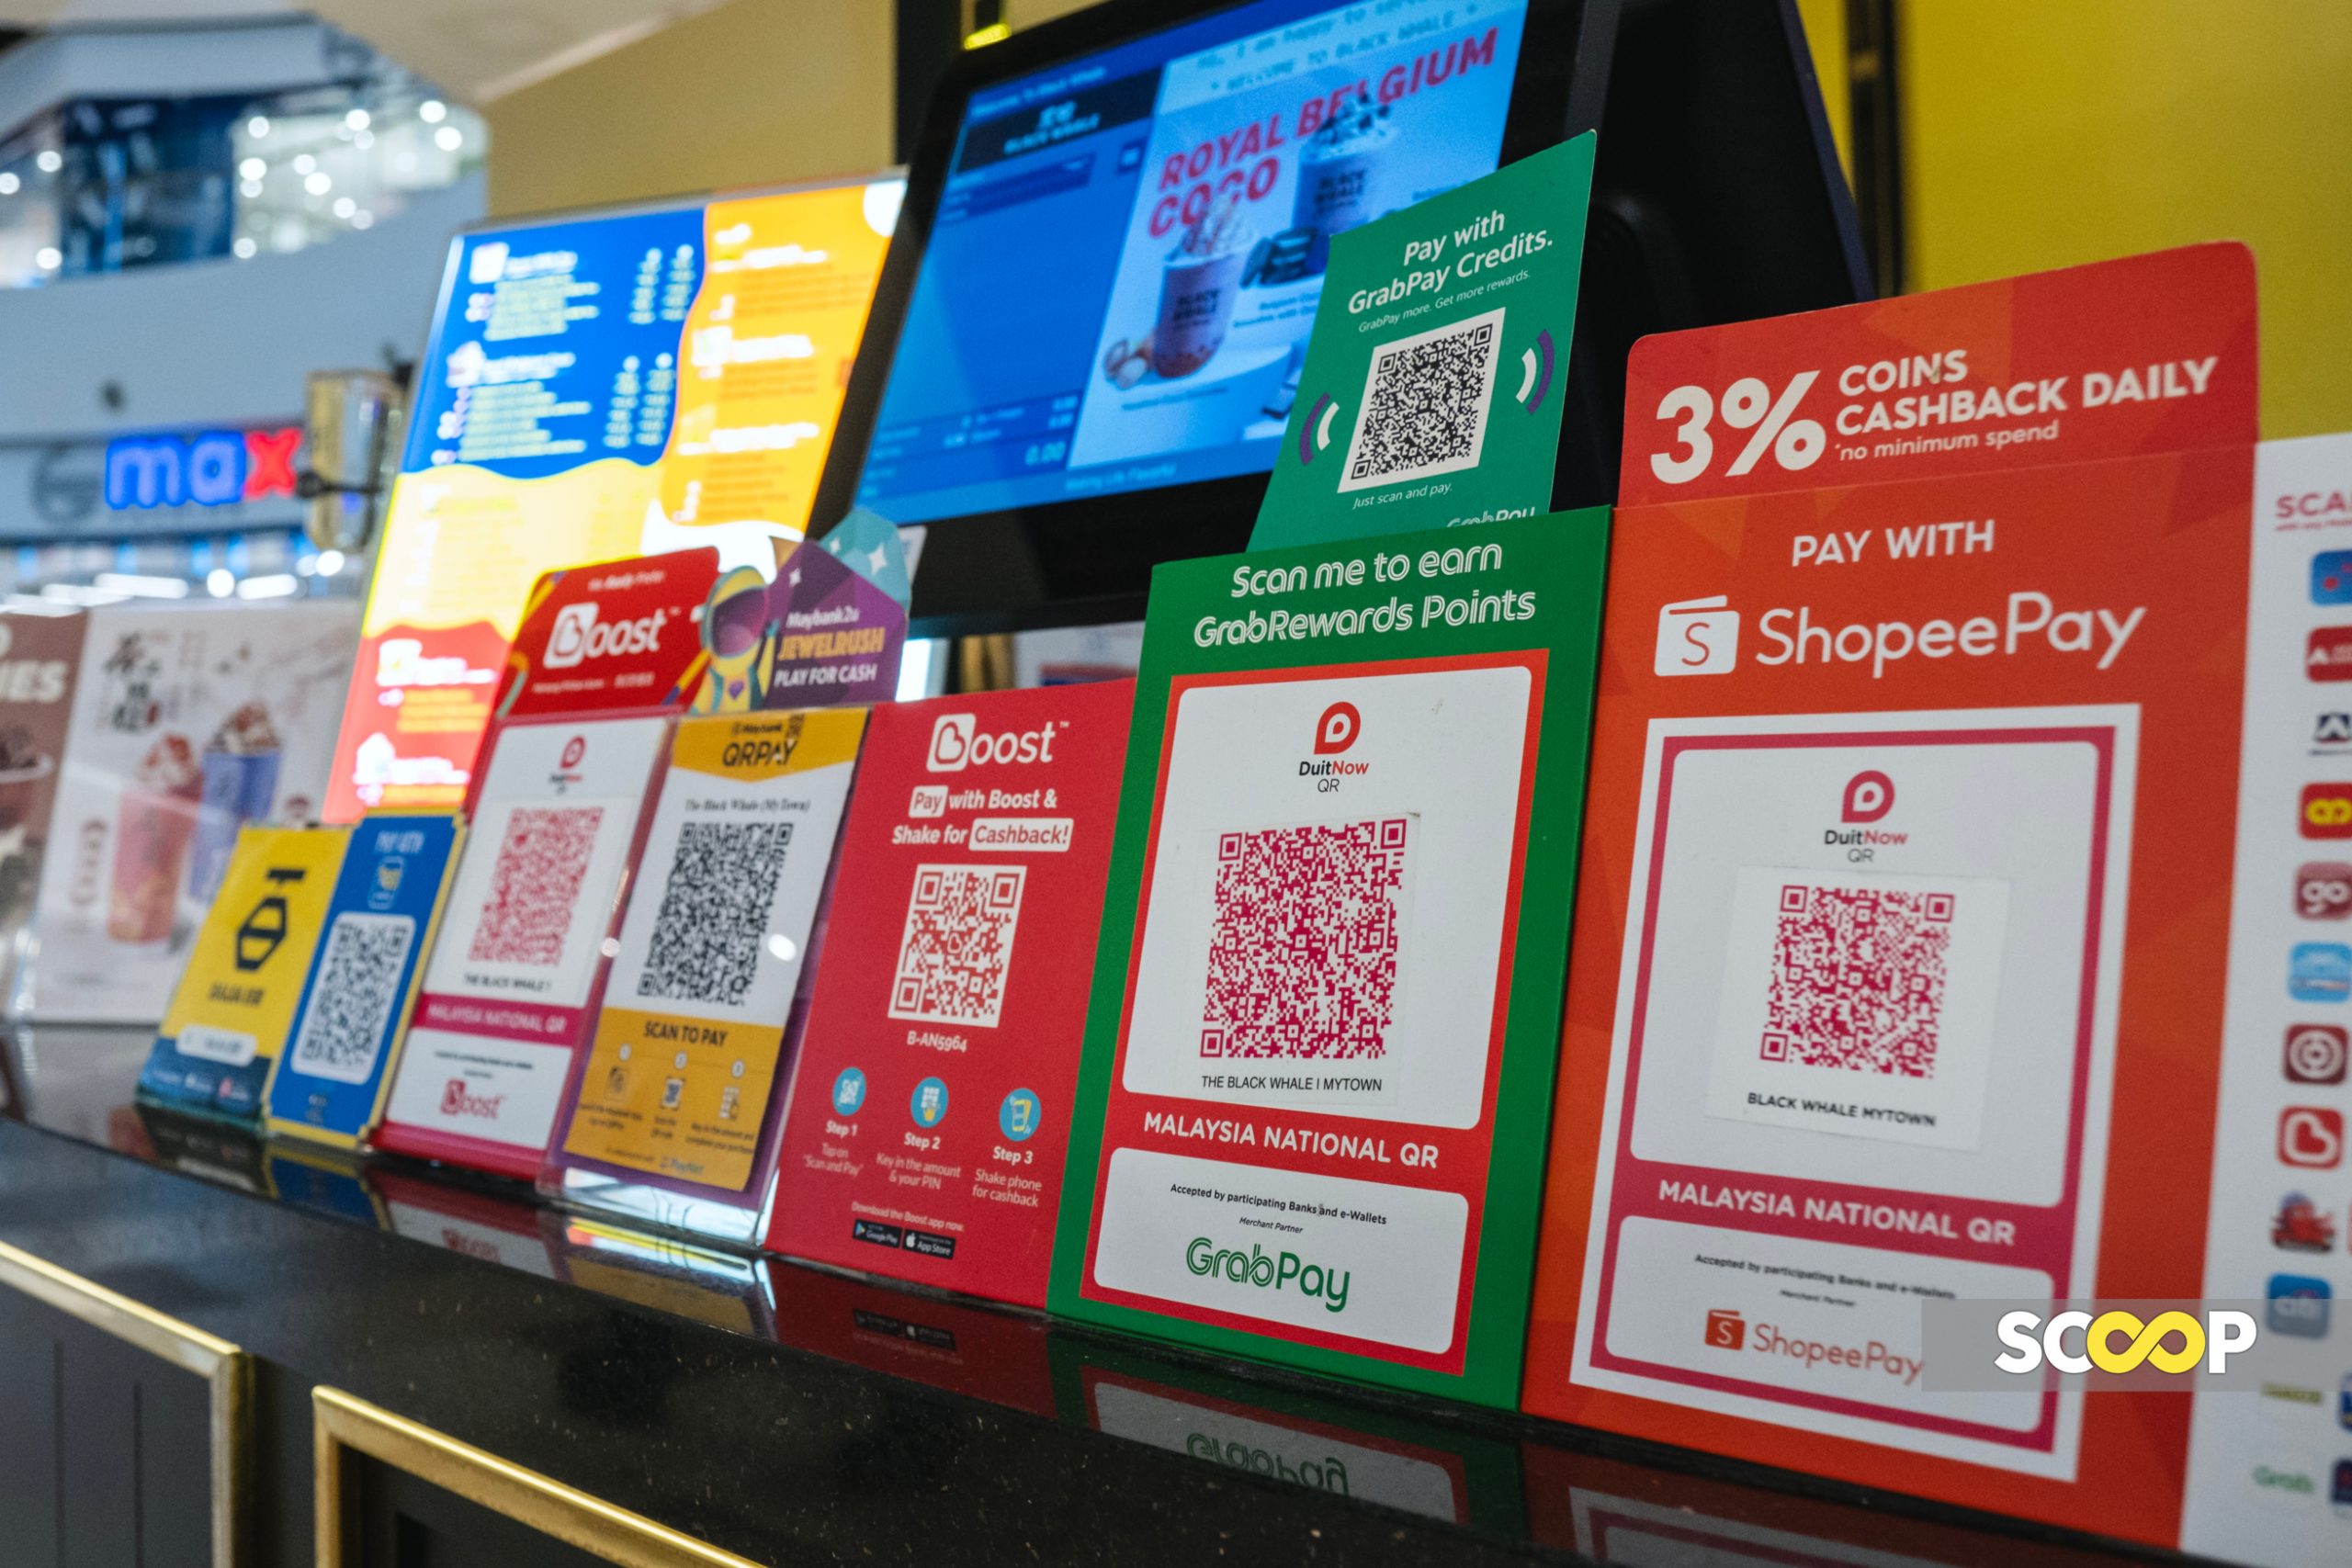 Hong Leong banks to continue waiving transaction fees for DuitNow QR